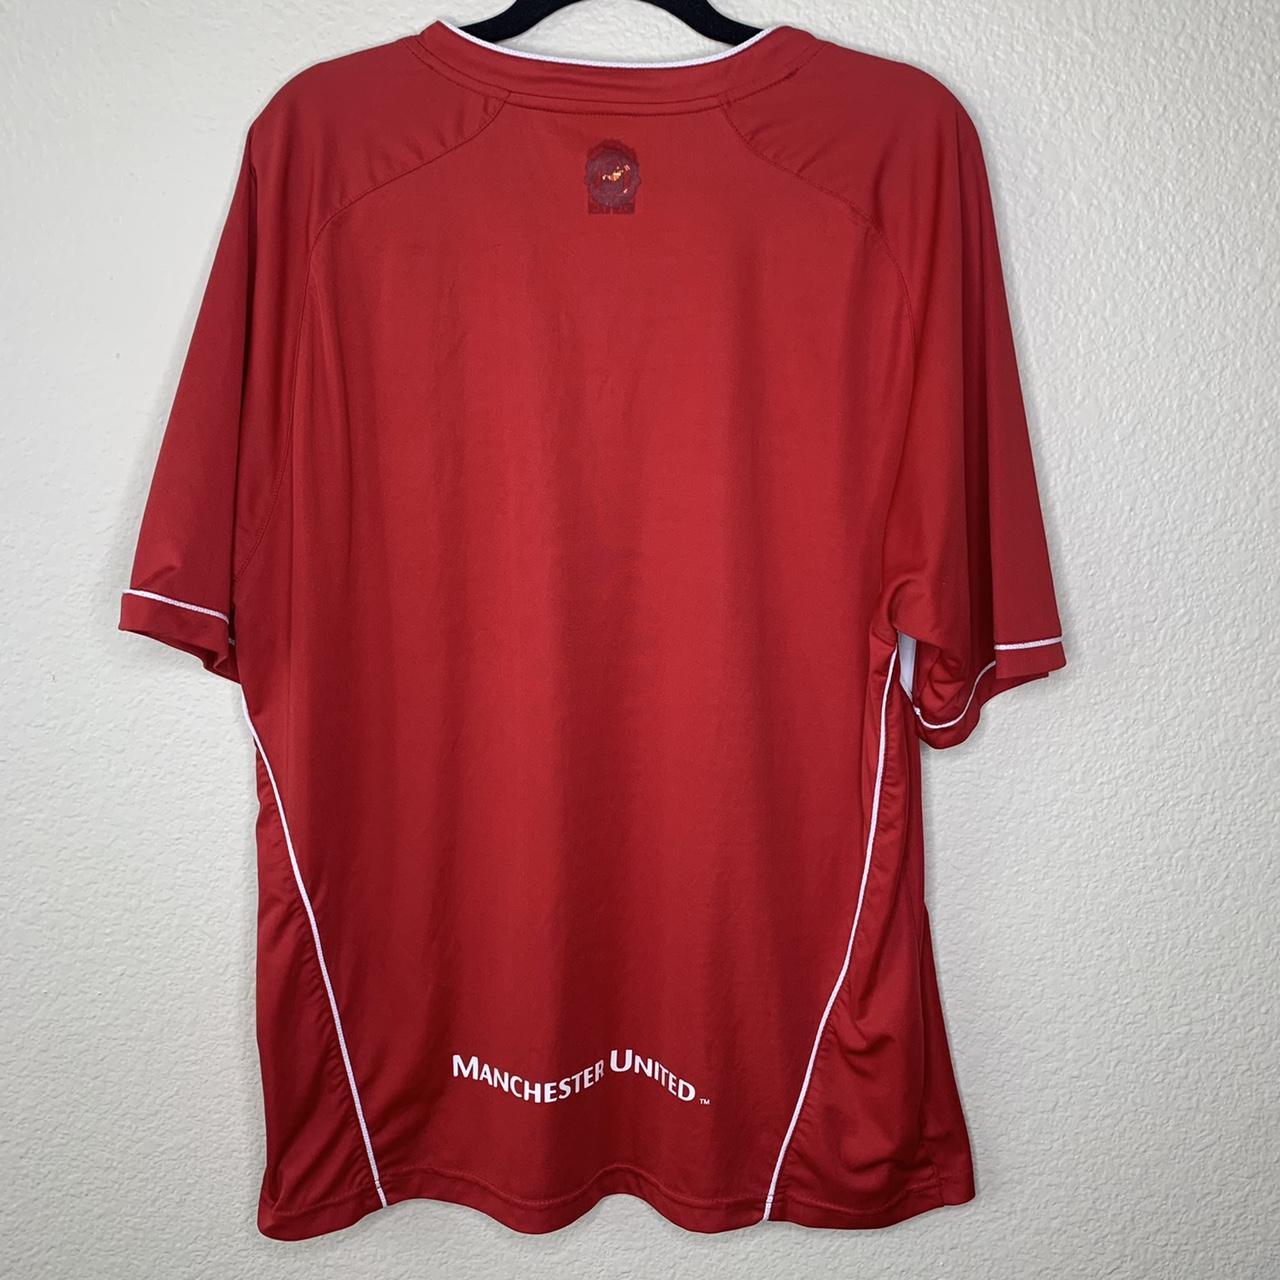 Product Image 3 - Manchester United training jersey .
•
#manchester